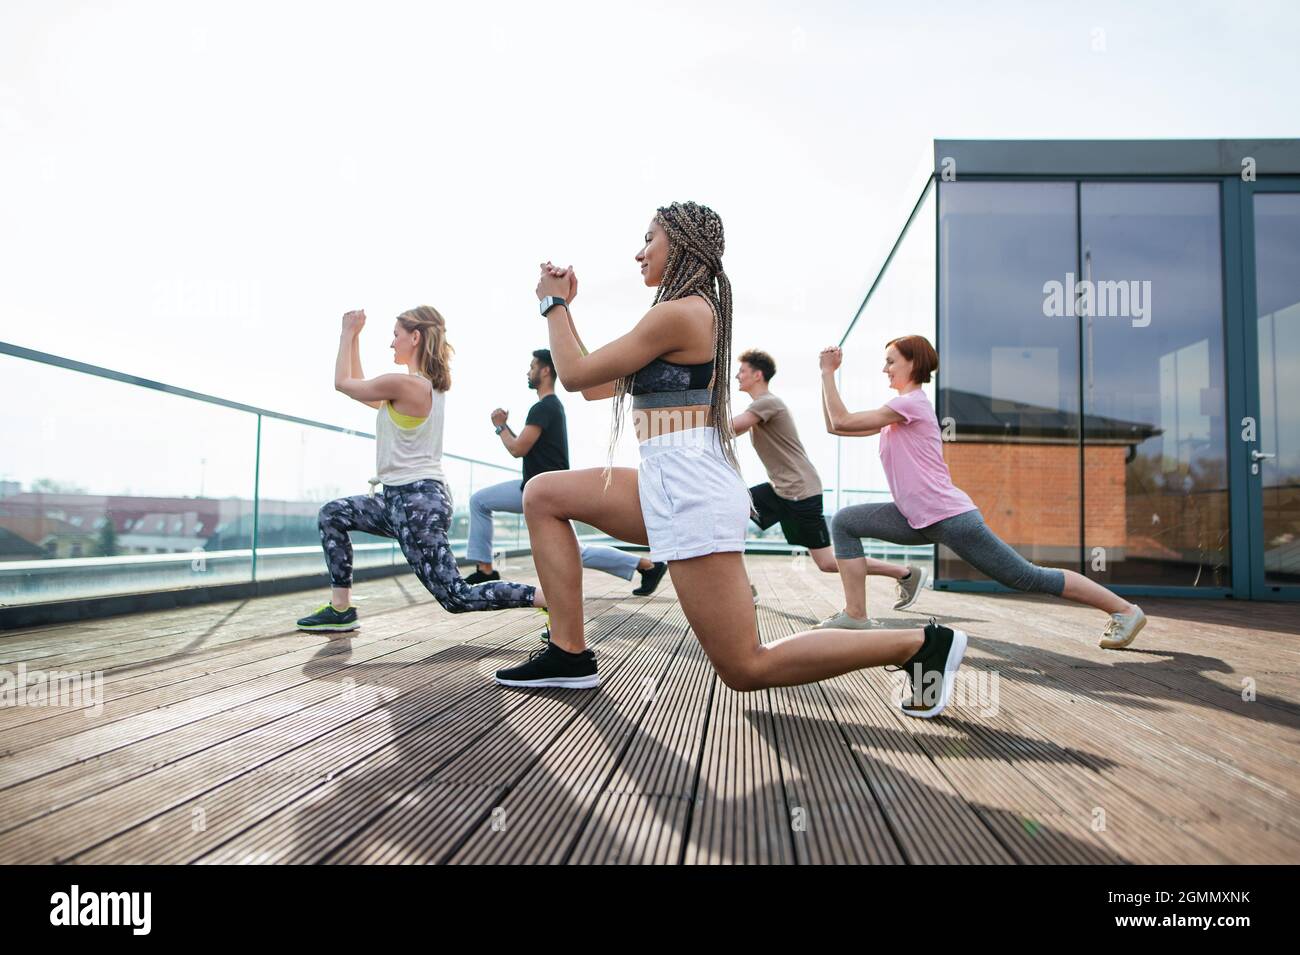 Group of young people doing exercise outdoors on terrace, sport and healthy lifestyle concept. Stock Photo